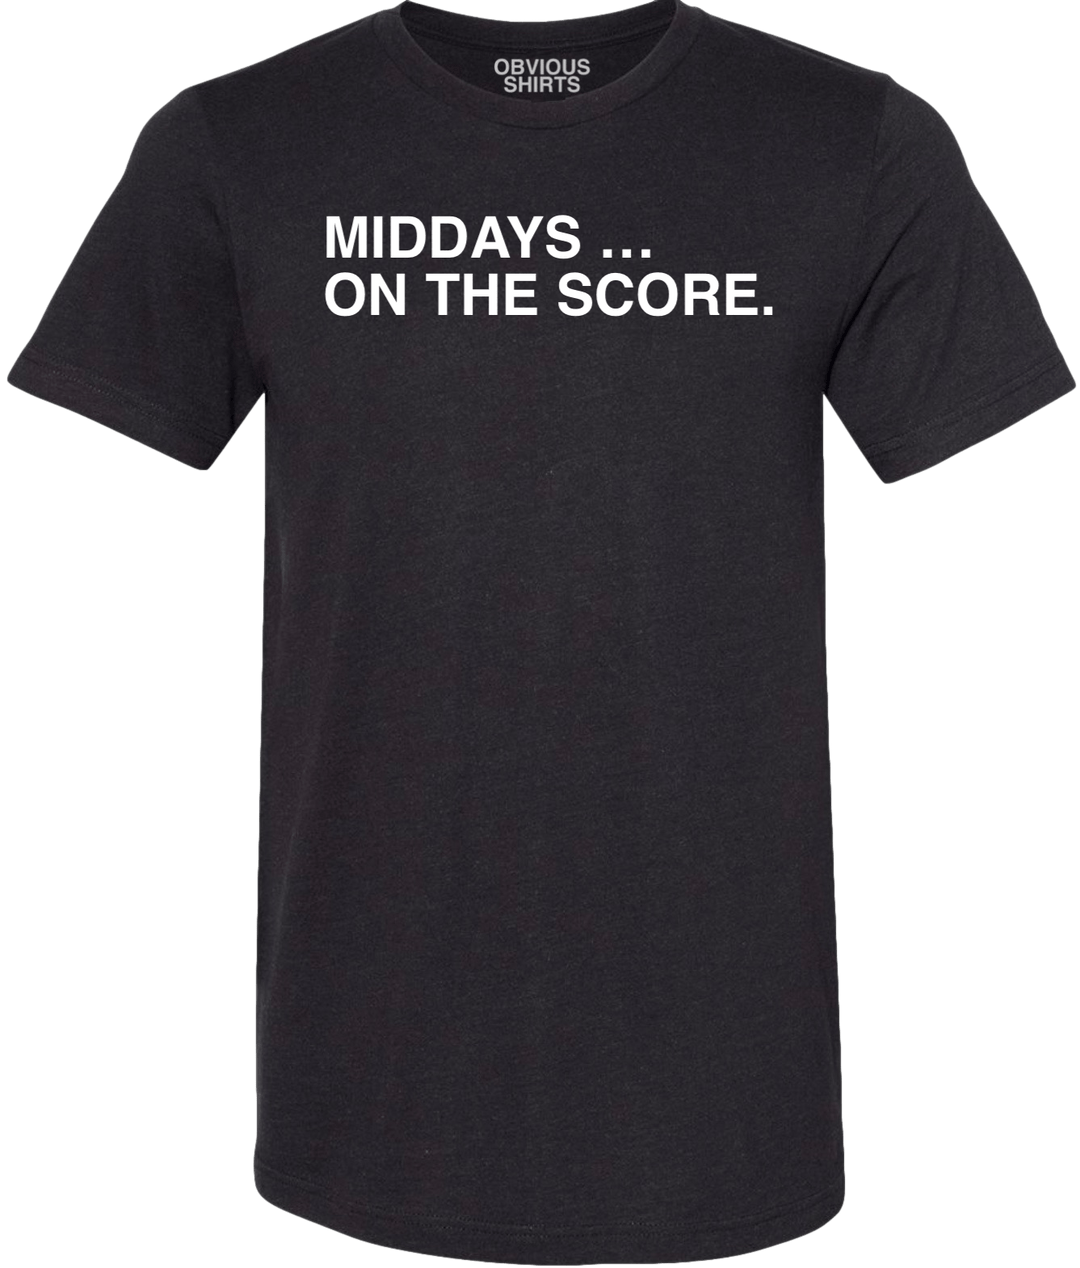 MIDDAYS...ON THE SCORE. (BLACK) - OBVIOUS SHIRTS